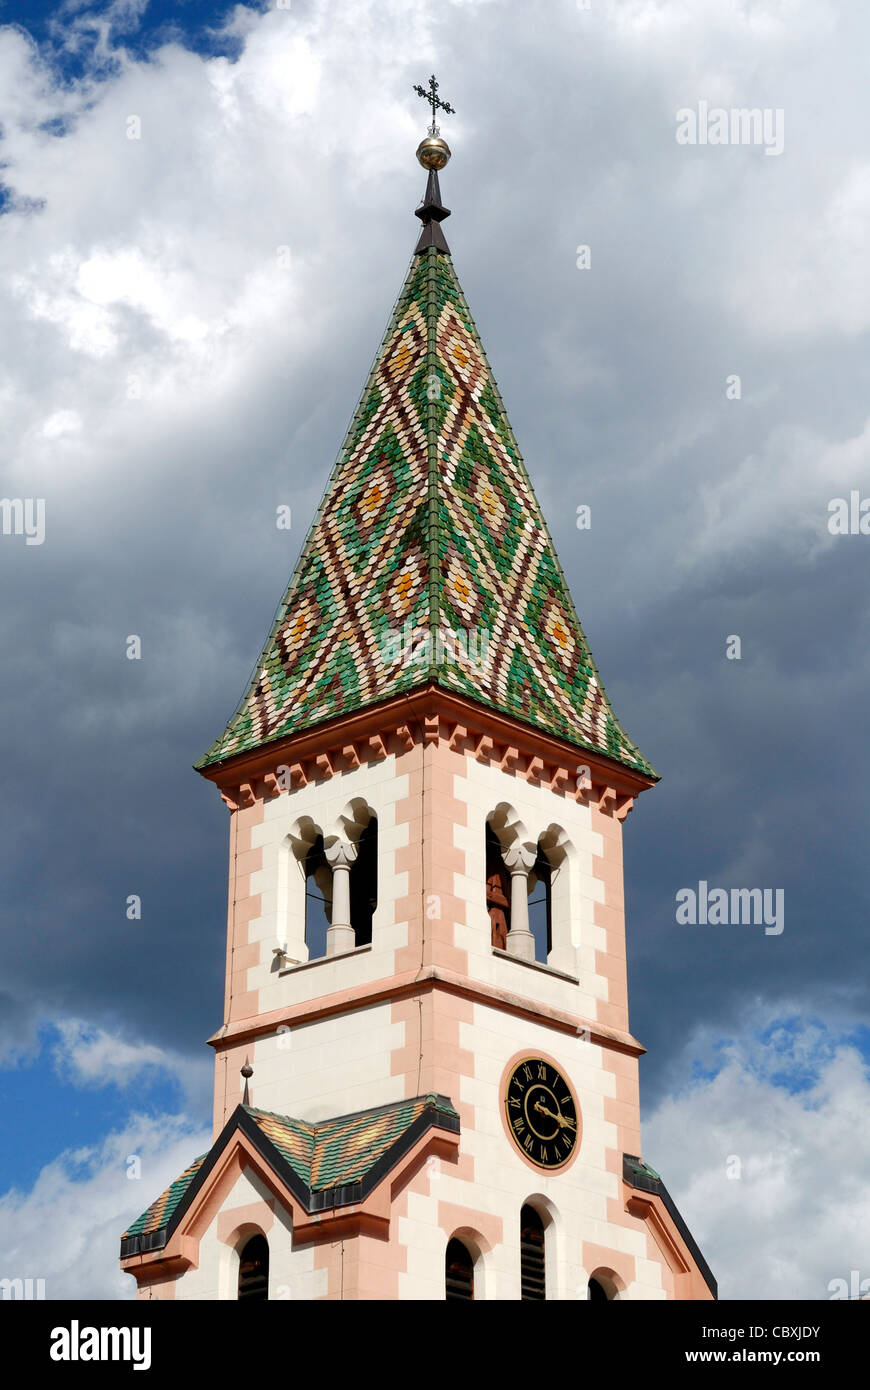 Parish church of St. Michael in the municipality of Eppan at the South Tyrolean wine route. Stock Photo